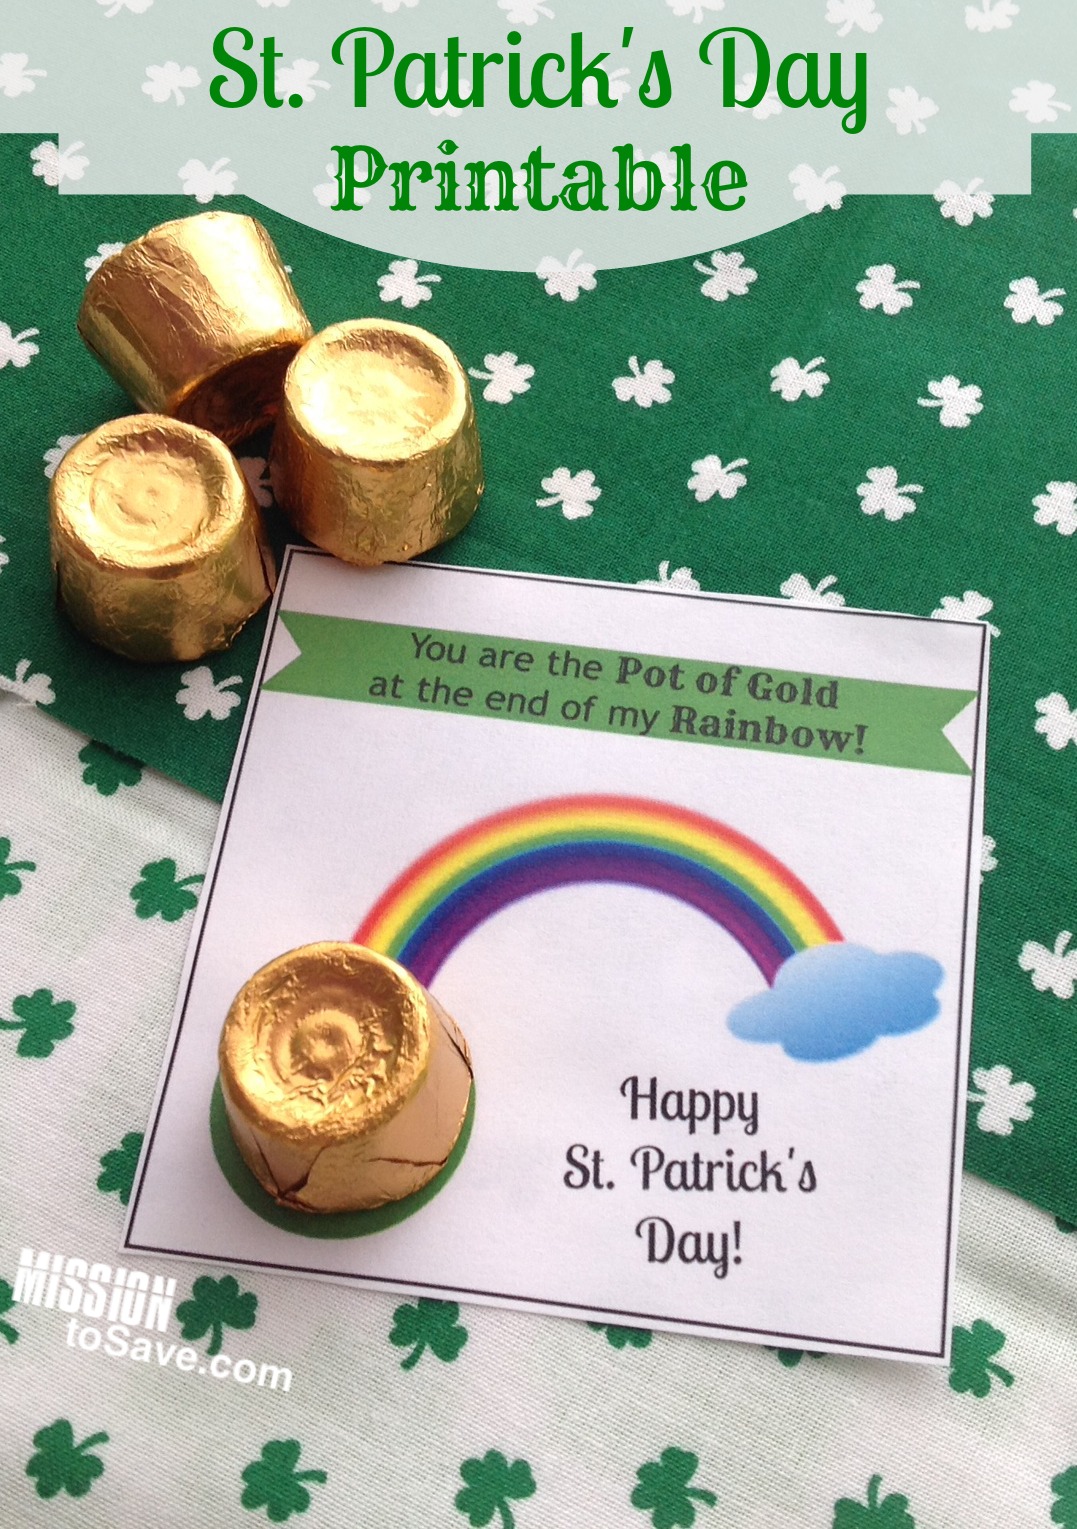 you-are-the-pot-of-gold-st-patrick-s-day-printable-tags-mission-to-save